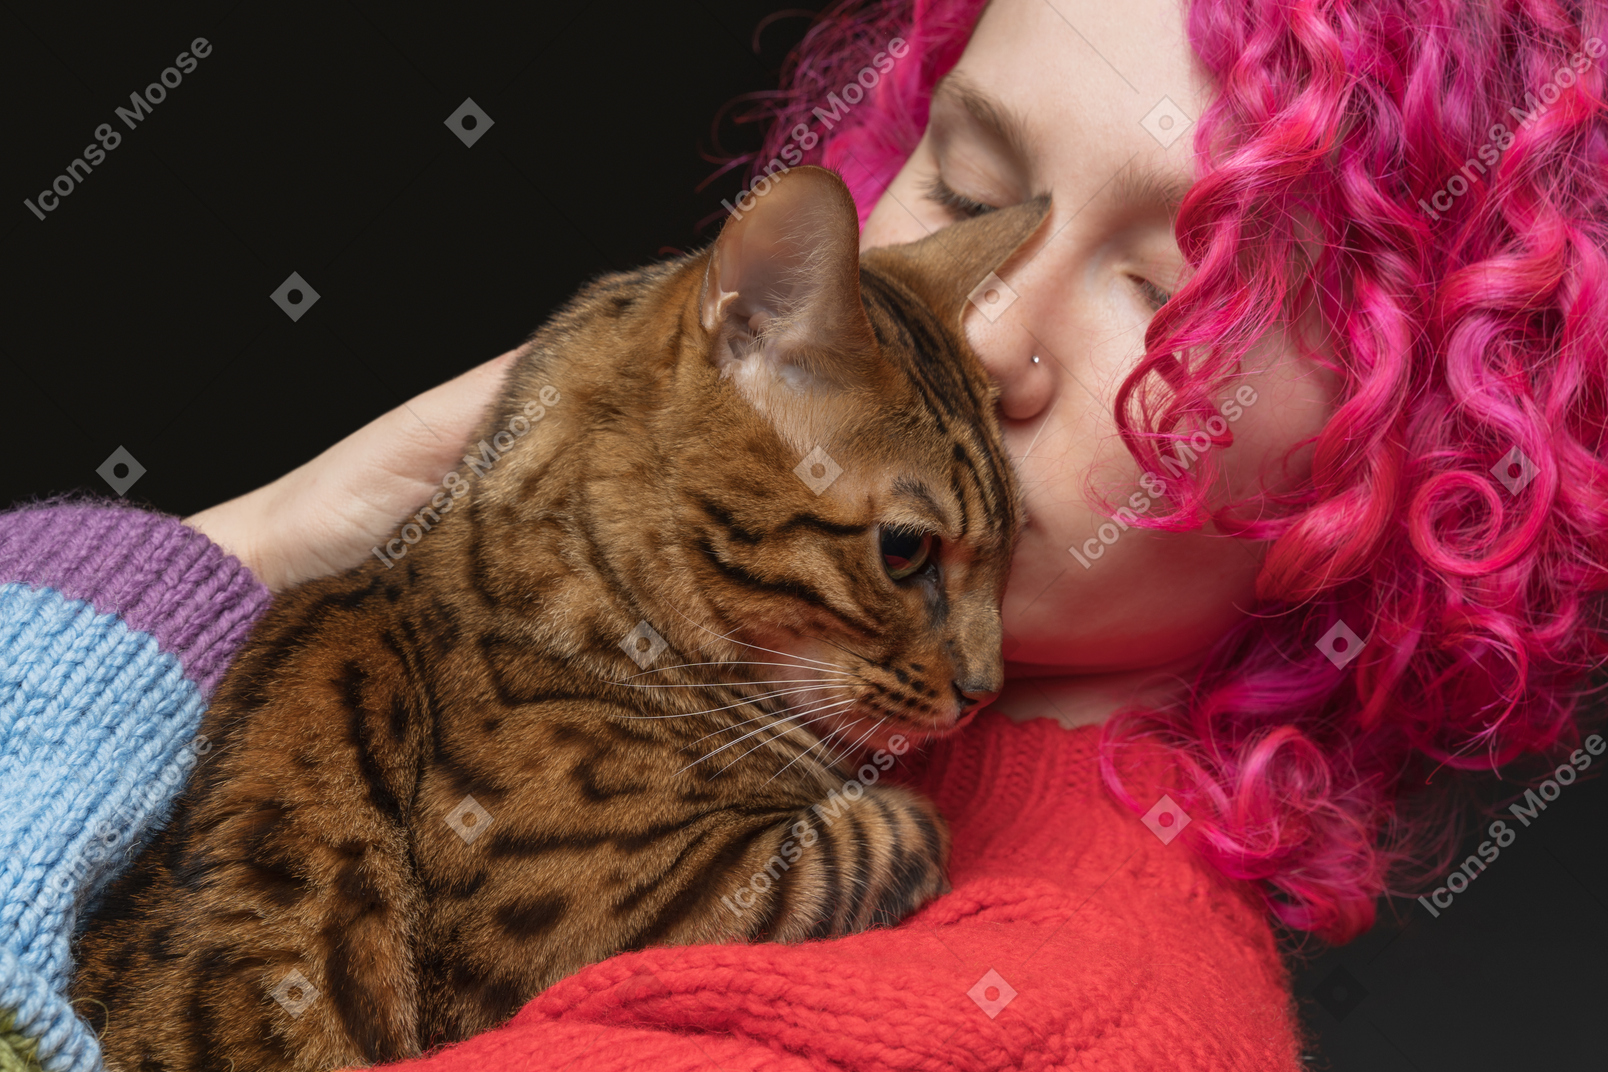 A bengal cat being kissed by its owner